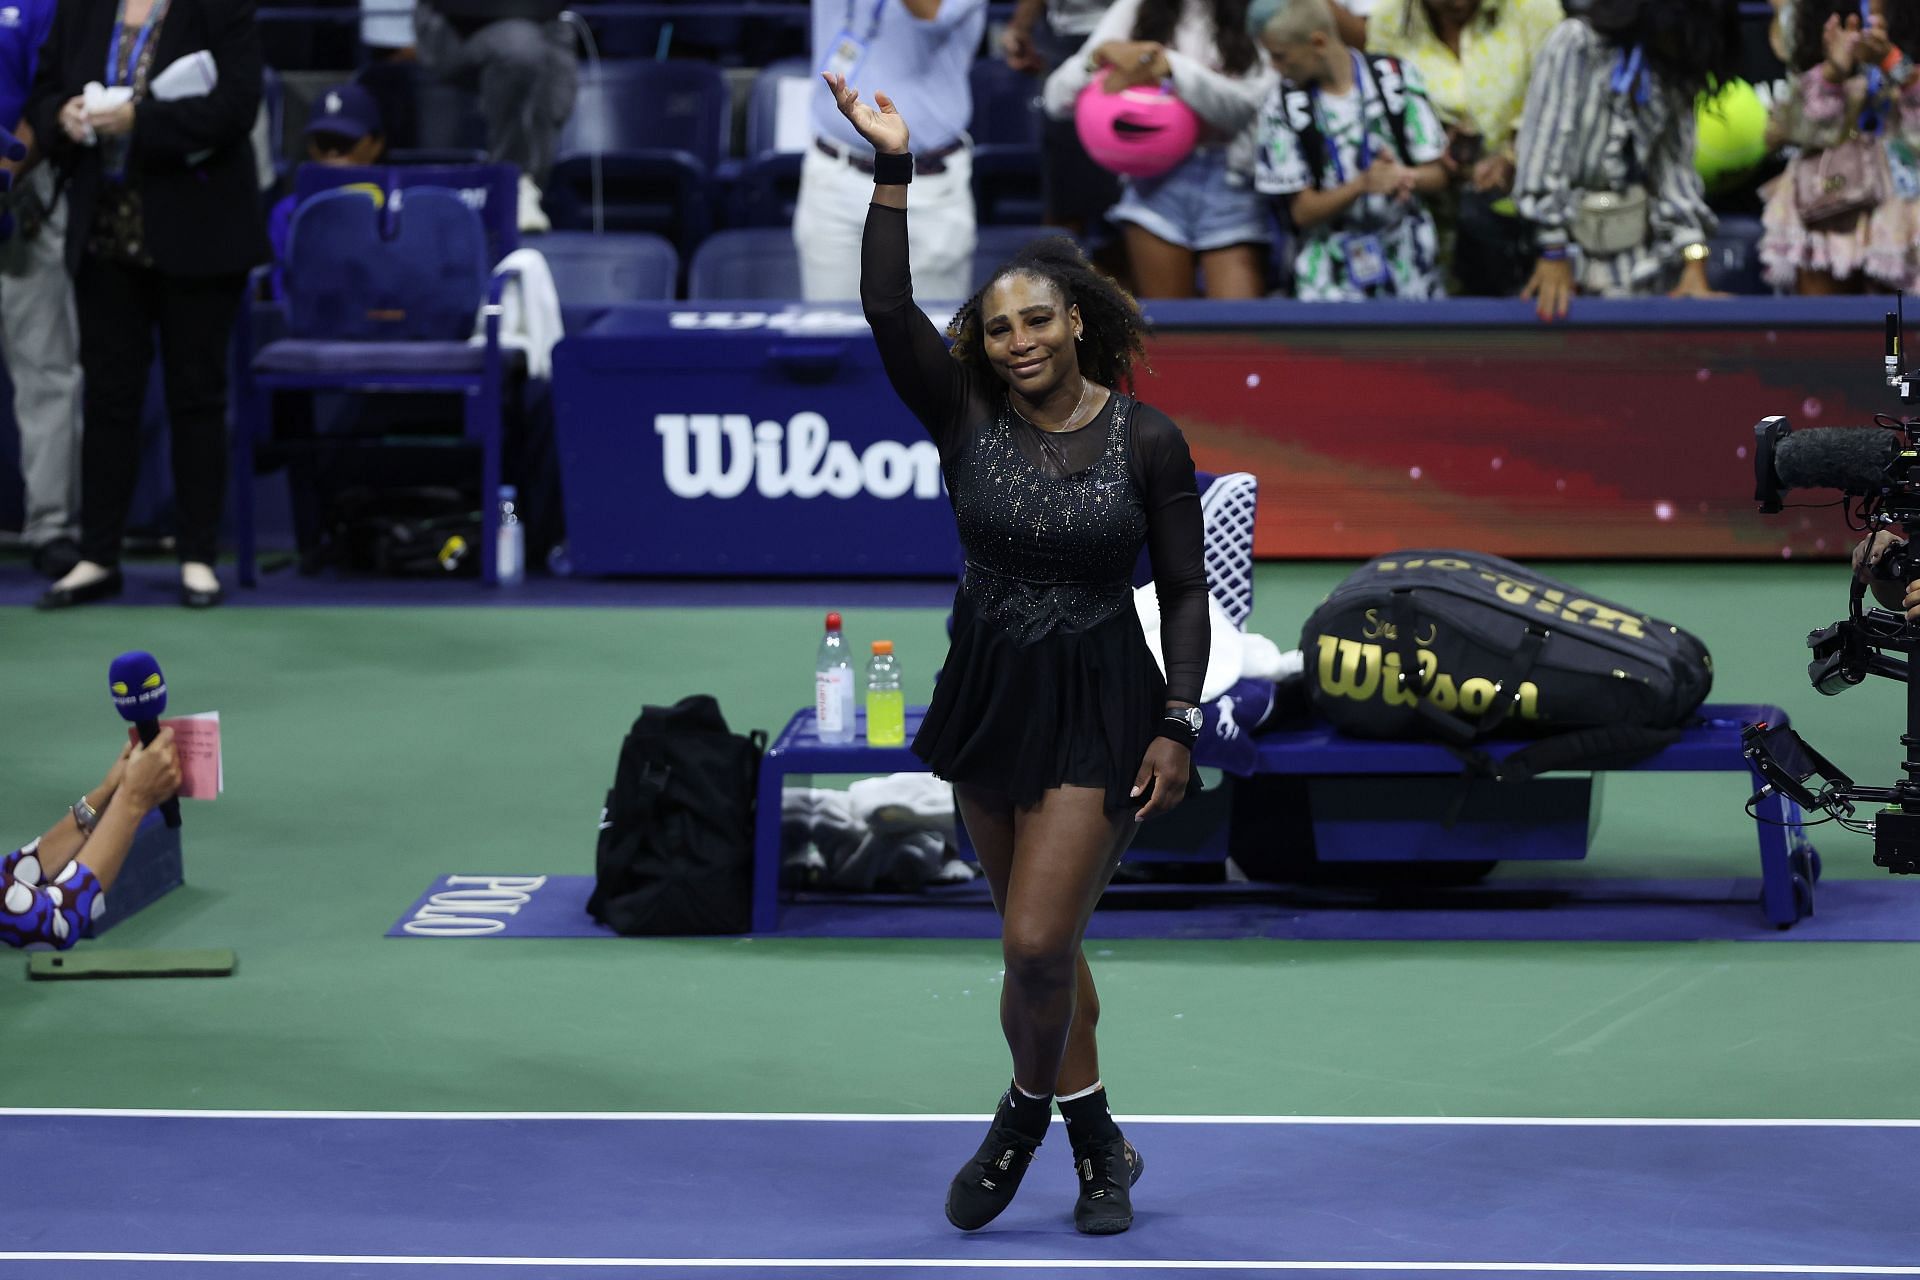 Williams after her last match at the US Open